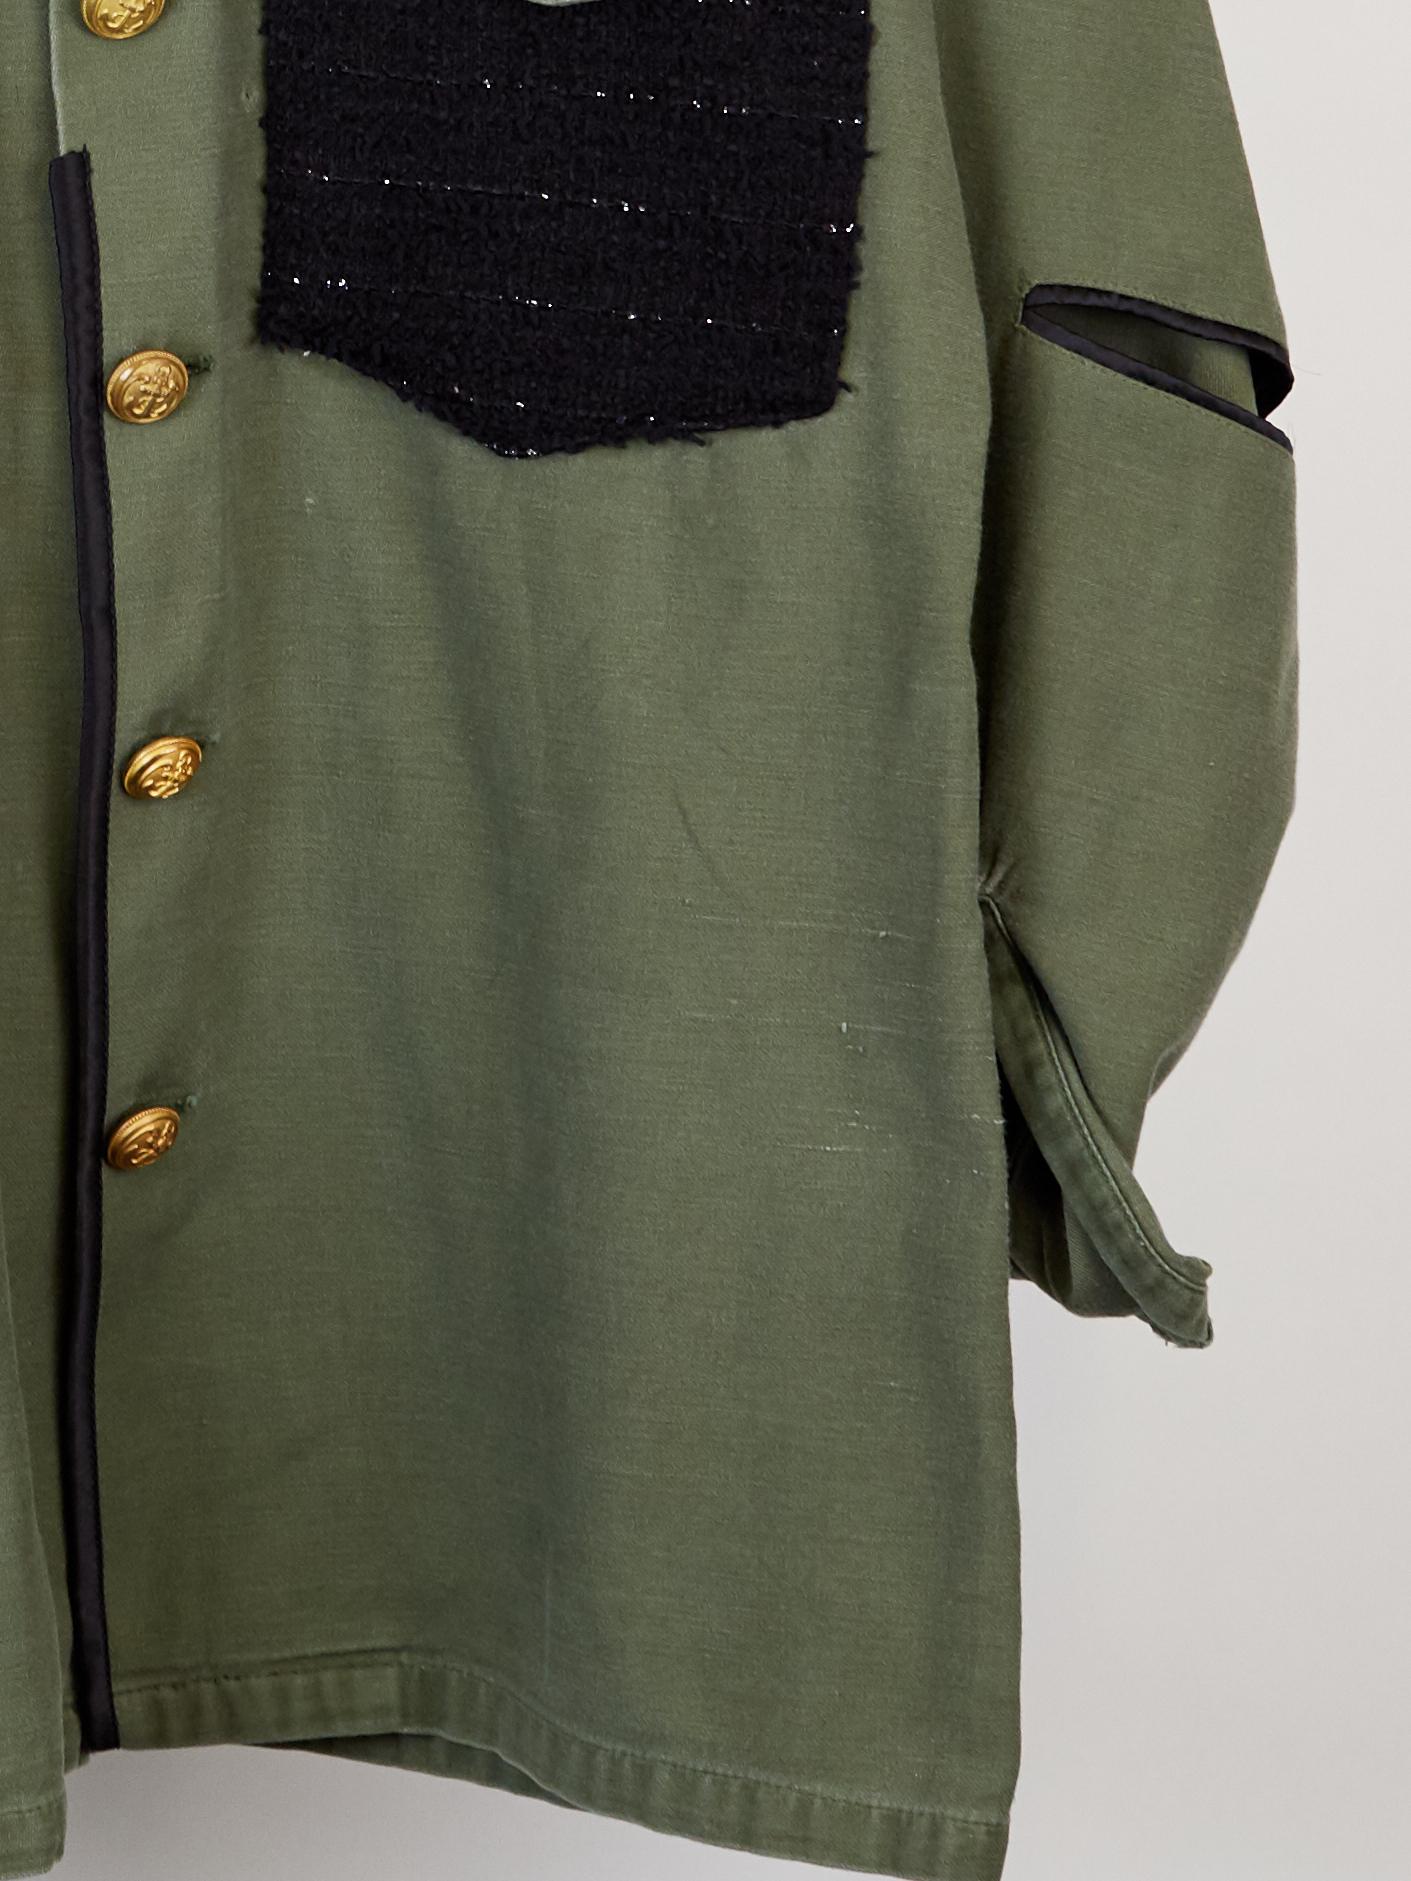 Black Military Green Jacket Tweed Gold Buttons Gold Braid One of a kind J Dauphin